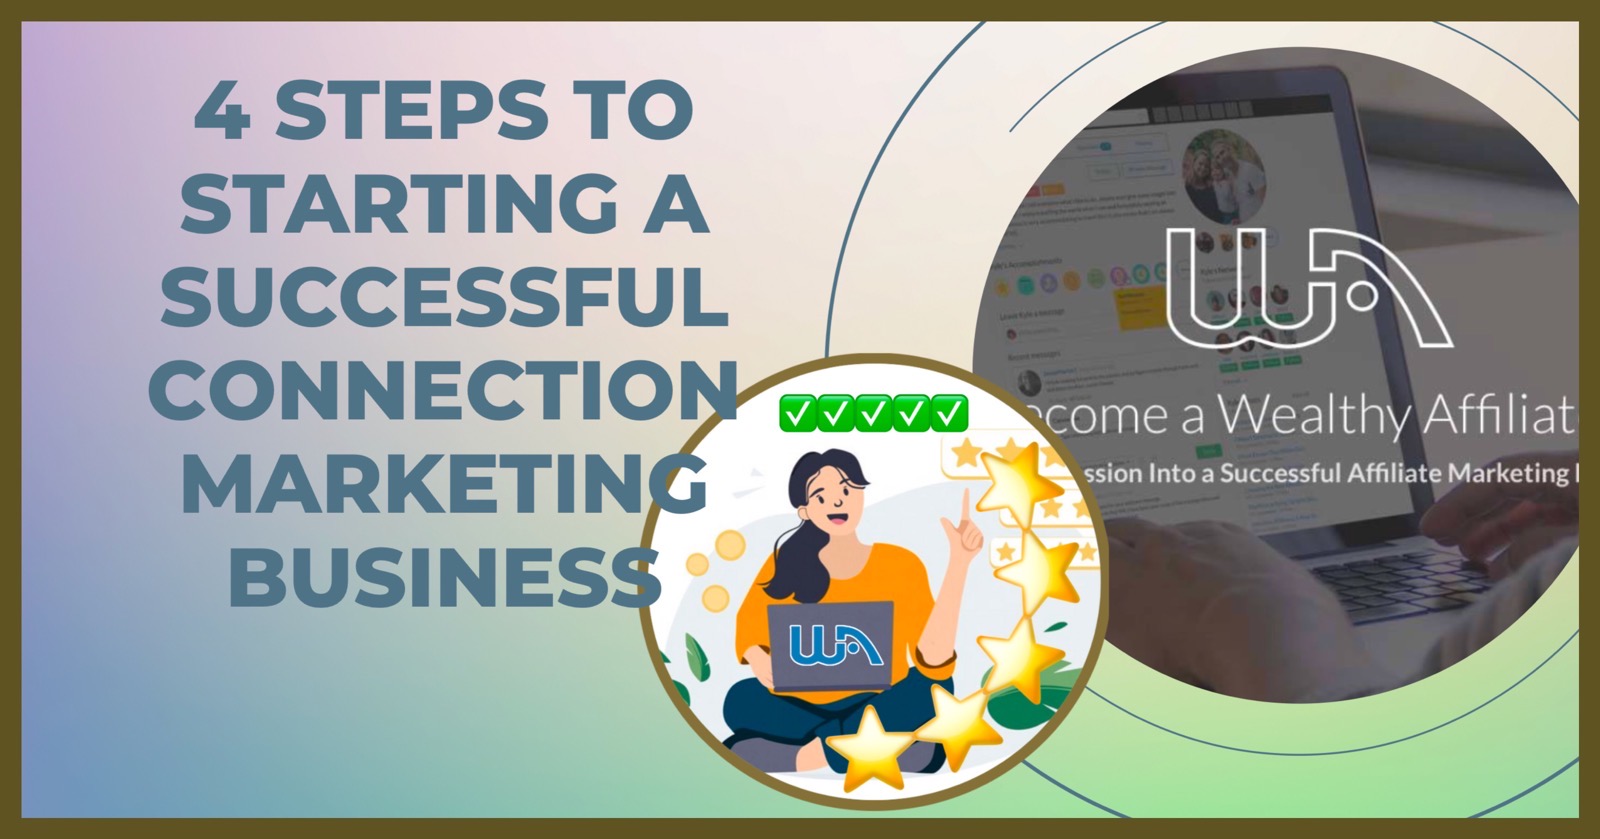 4 Steps to Starting a Successful Connection Marketing Business